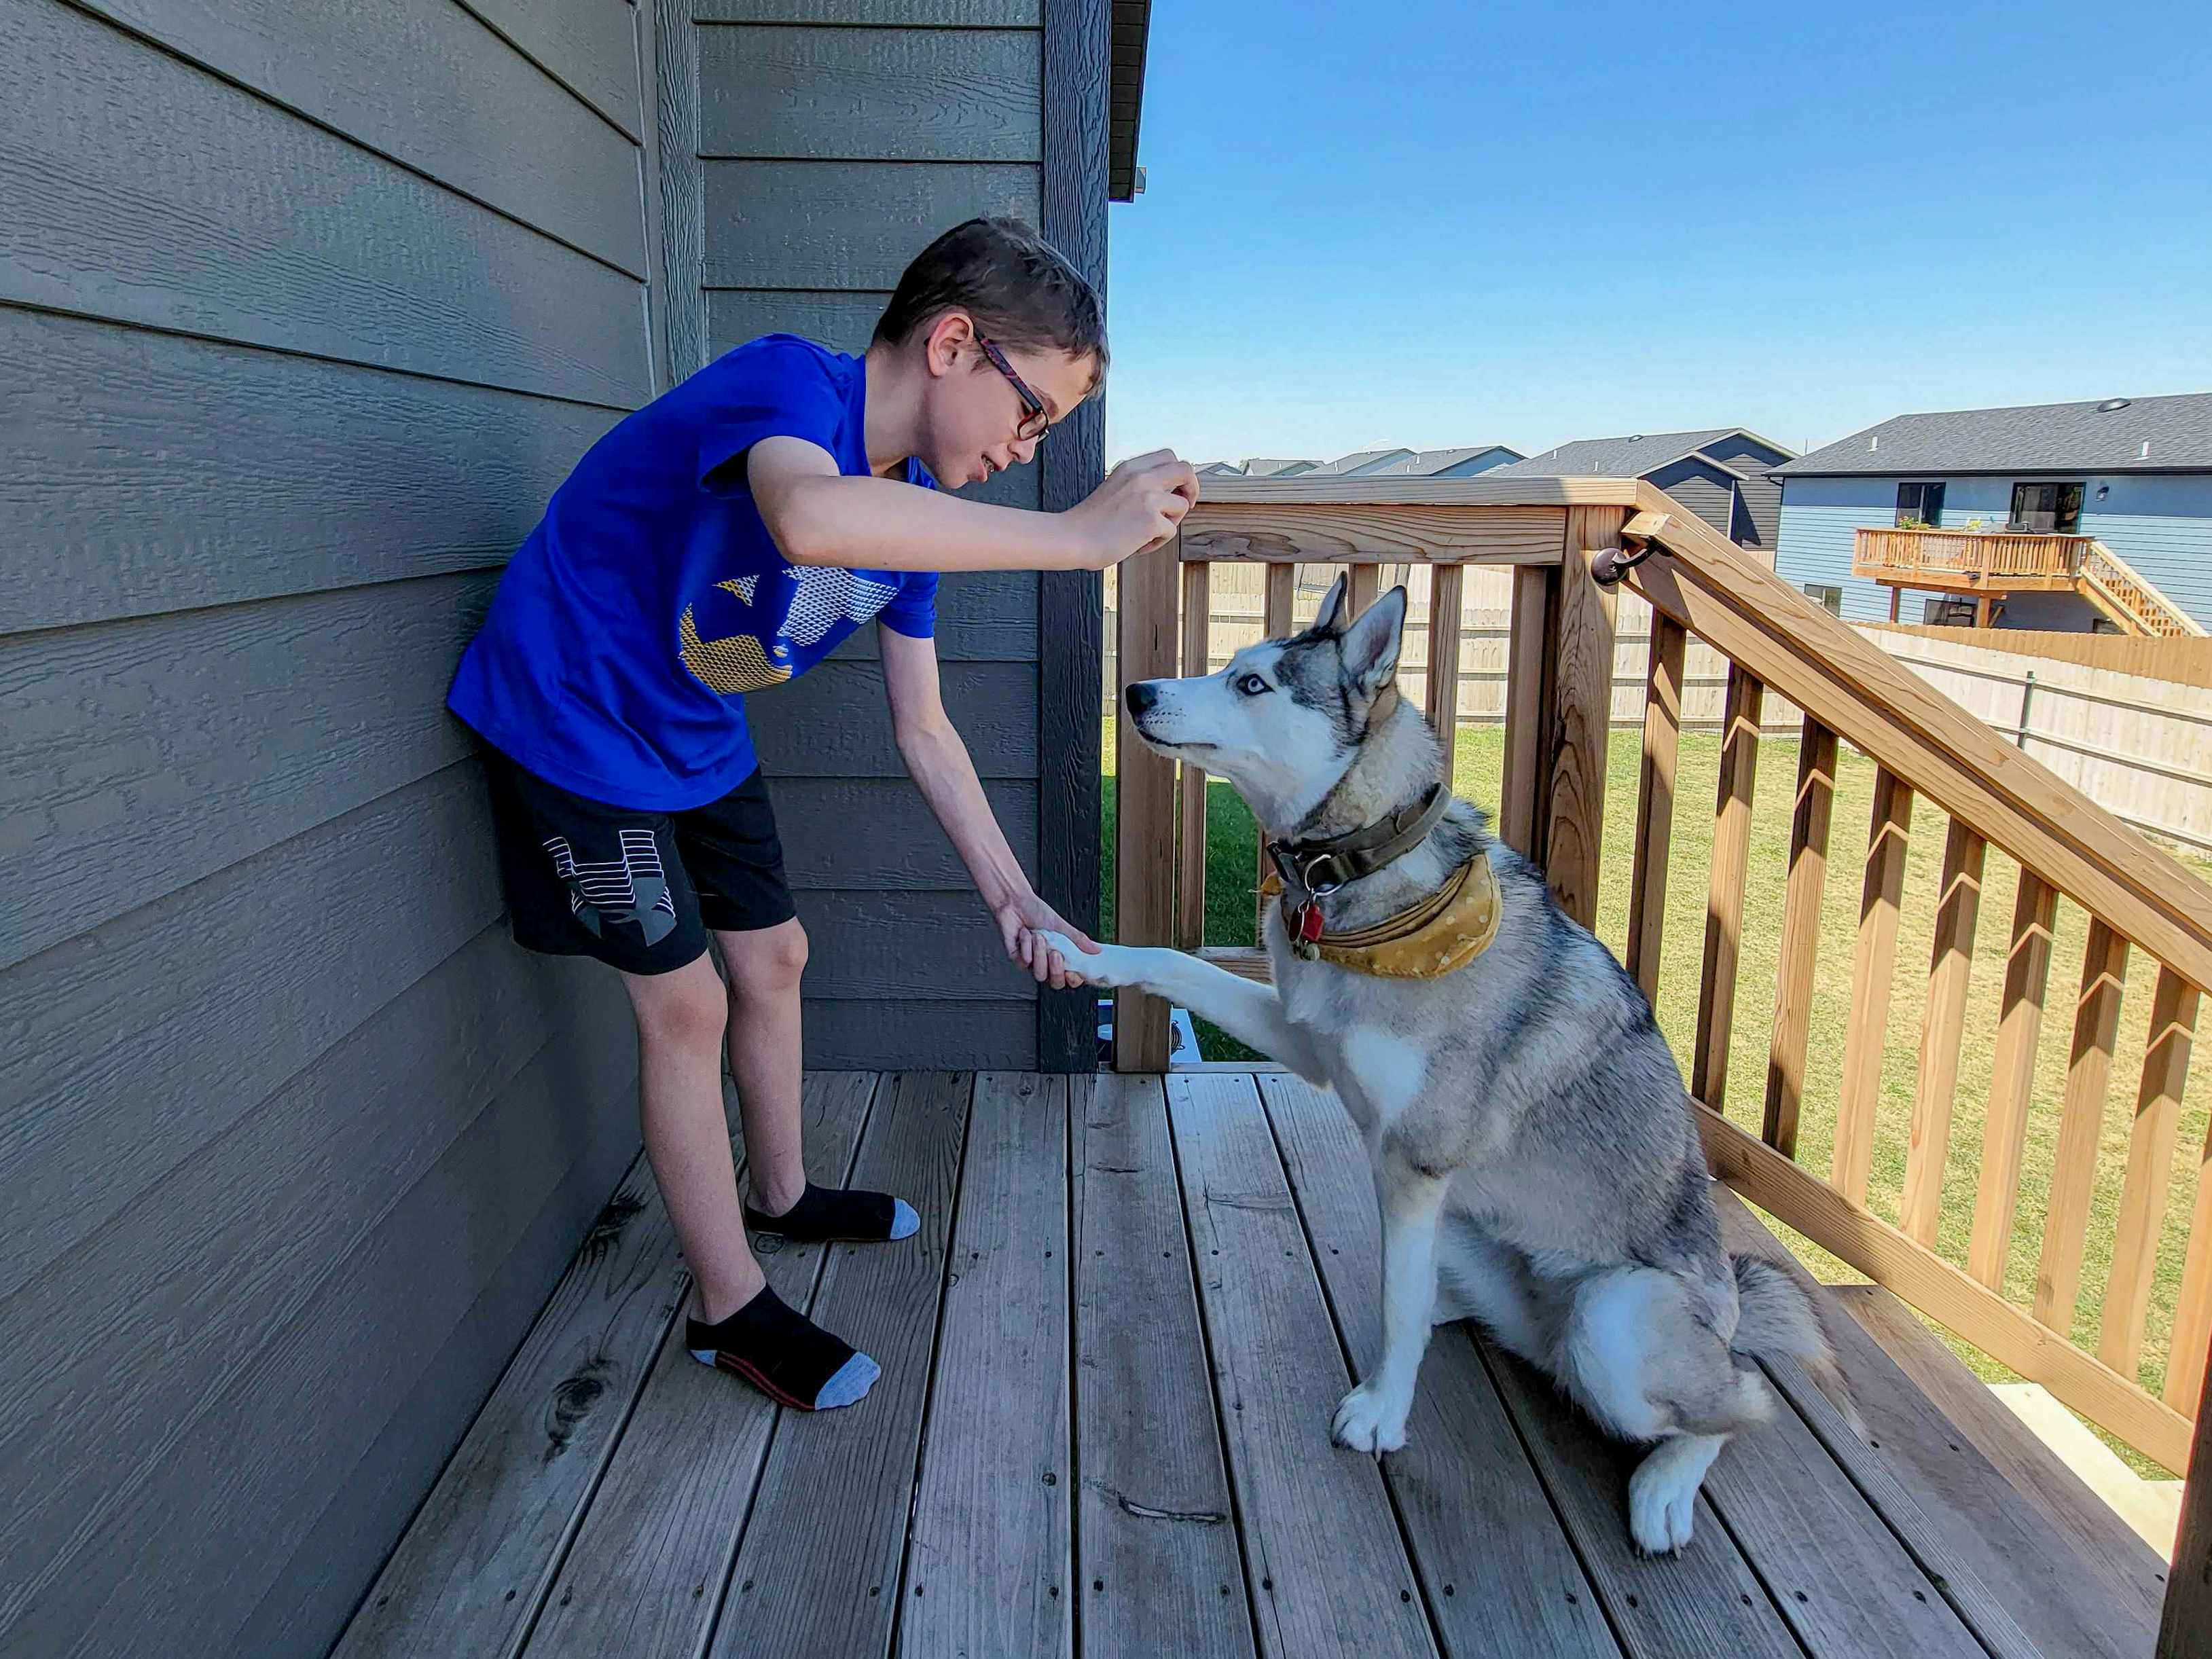 A young boy using a treat to train his dog how to shake on a wooden deck.